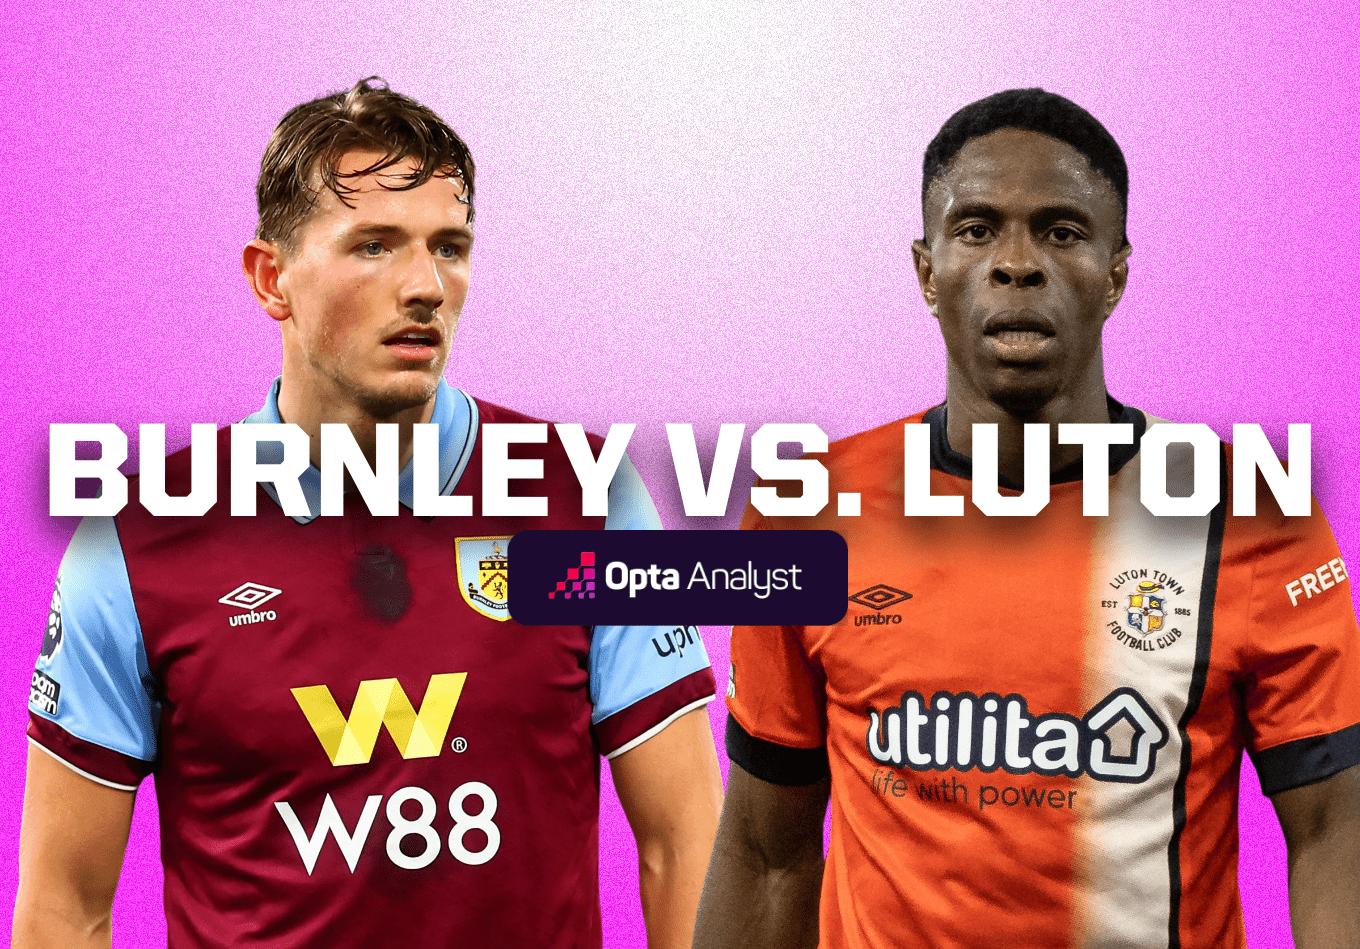 Burnley vs Luton: Prediction and Preview